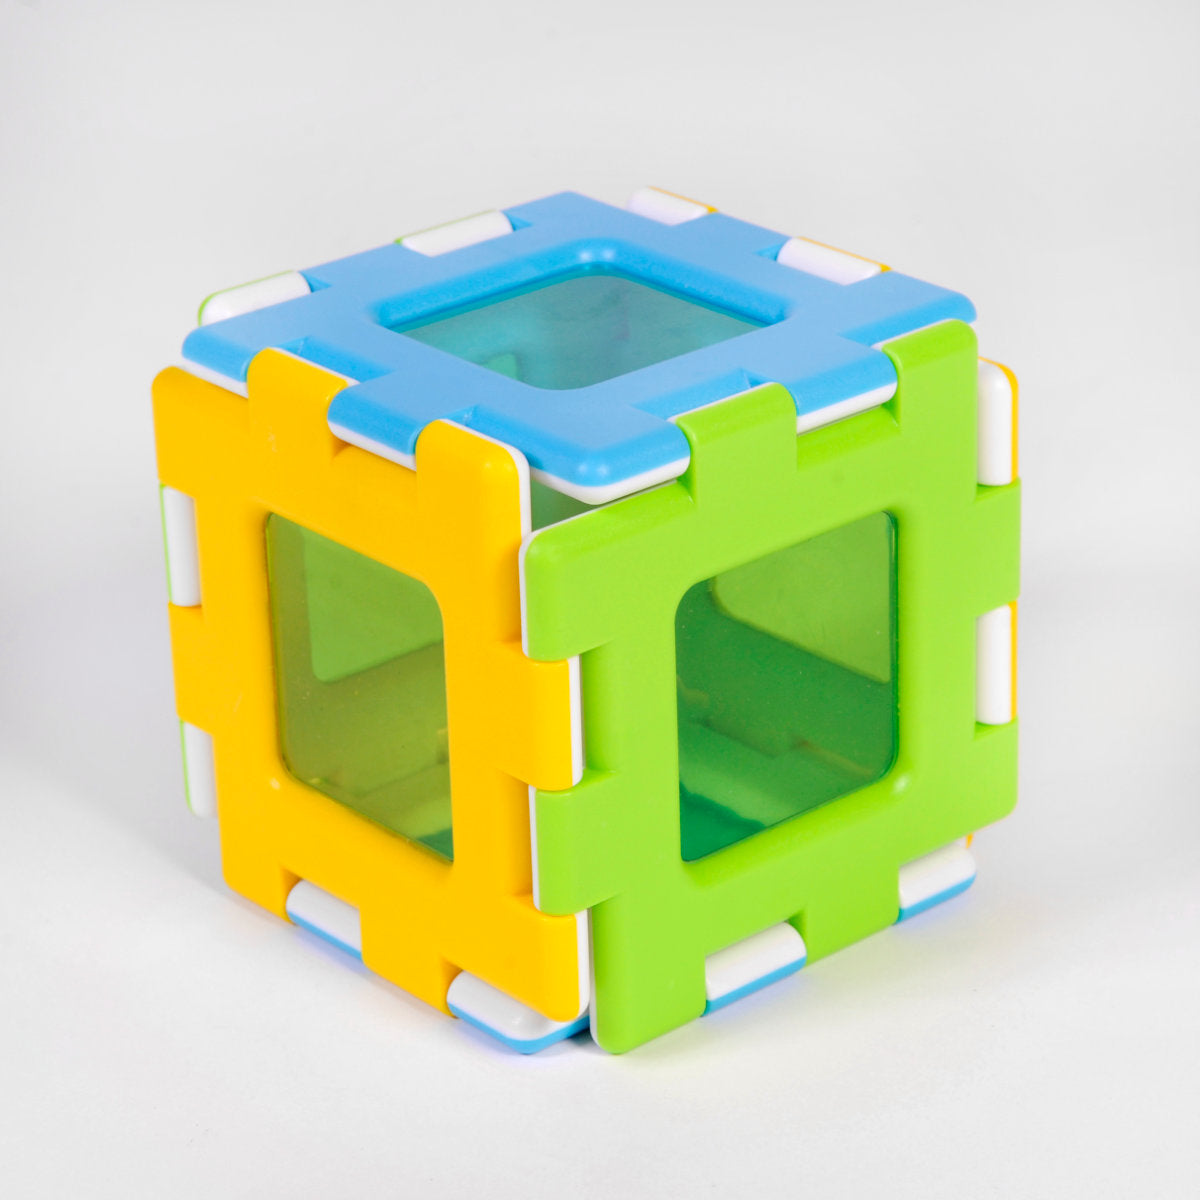 My First Polydron Windows Set 72 Piece, Introducing our first Polydron Windows Set, specially designed to bring excitement and creativity to an entire class! This set is perfect for collaborative learning, allowing multiple children to engage in constructive play simultaneously.As light passes through the vibrant, translucent pieces, a mesmerizing display of colors and patterns come to life. It truly looks spectacular against any light source, captivating young minds and igniting their imagination.With its 